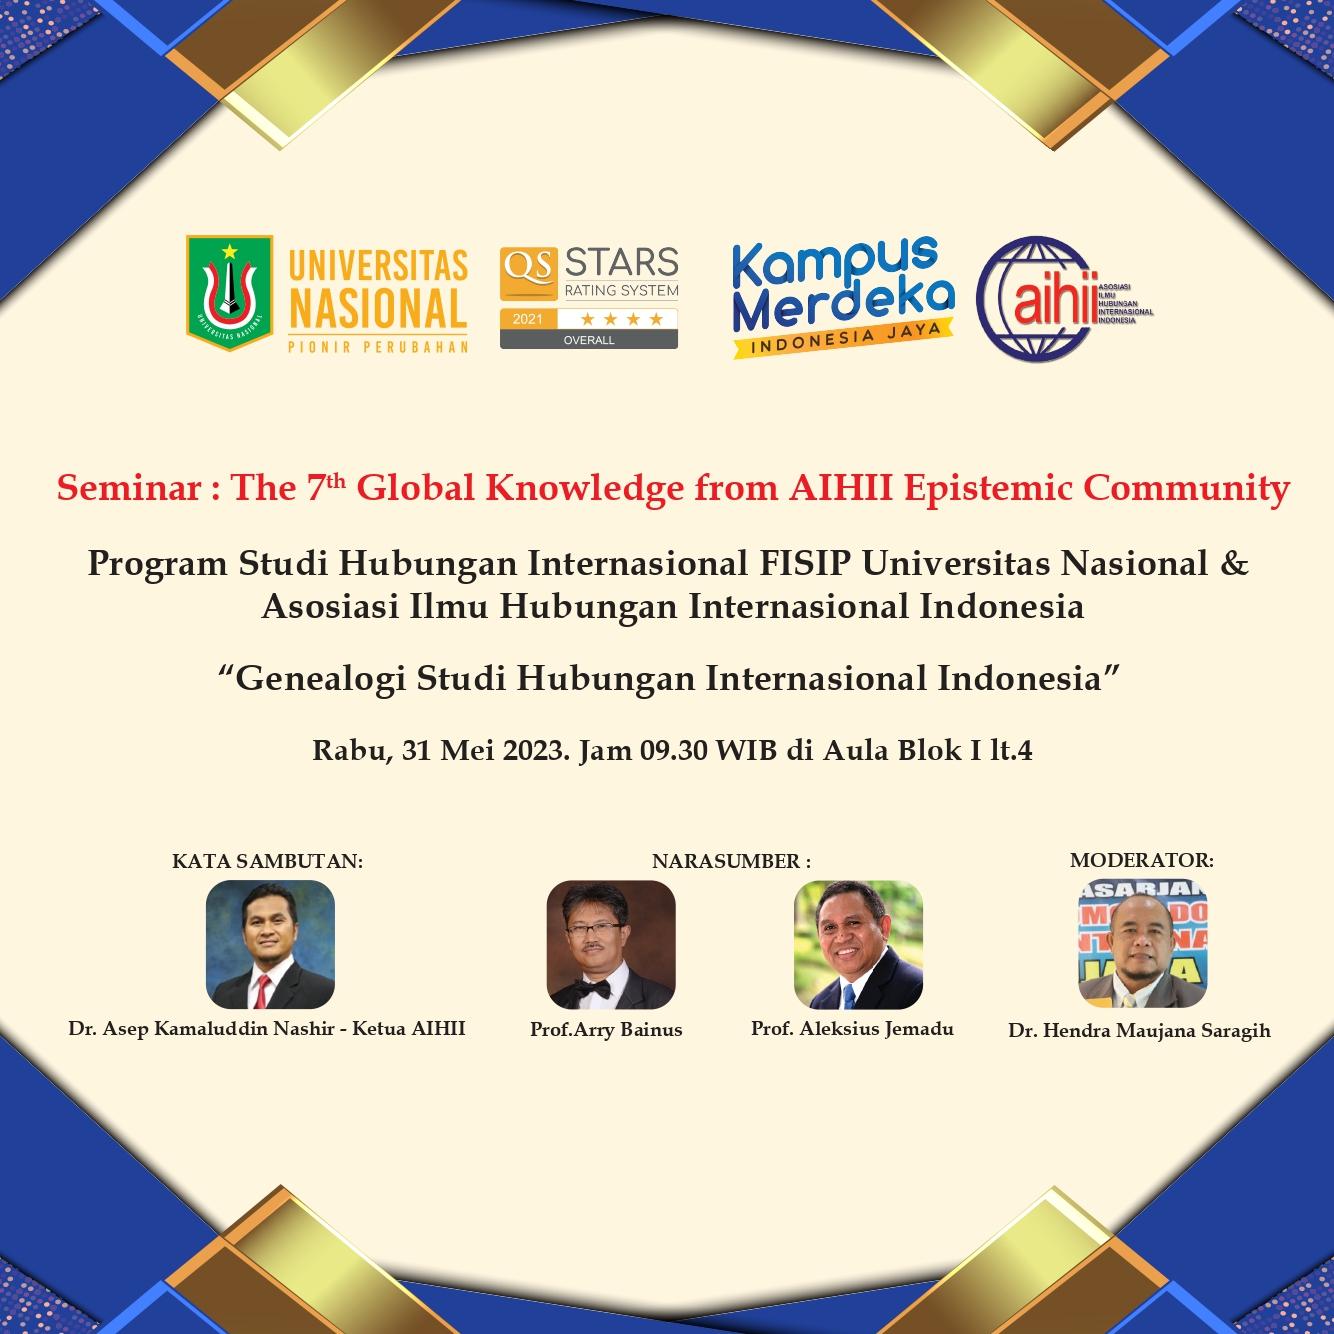 Seminar: The 7th Global Knowledge from AIHII Epistemic Community